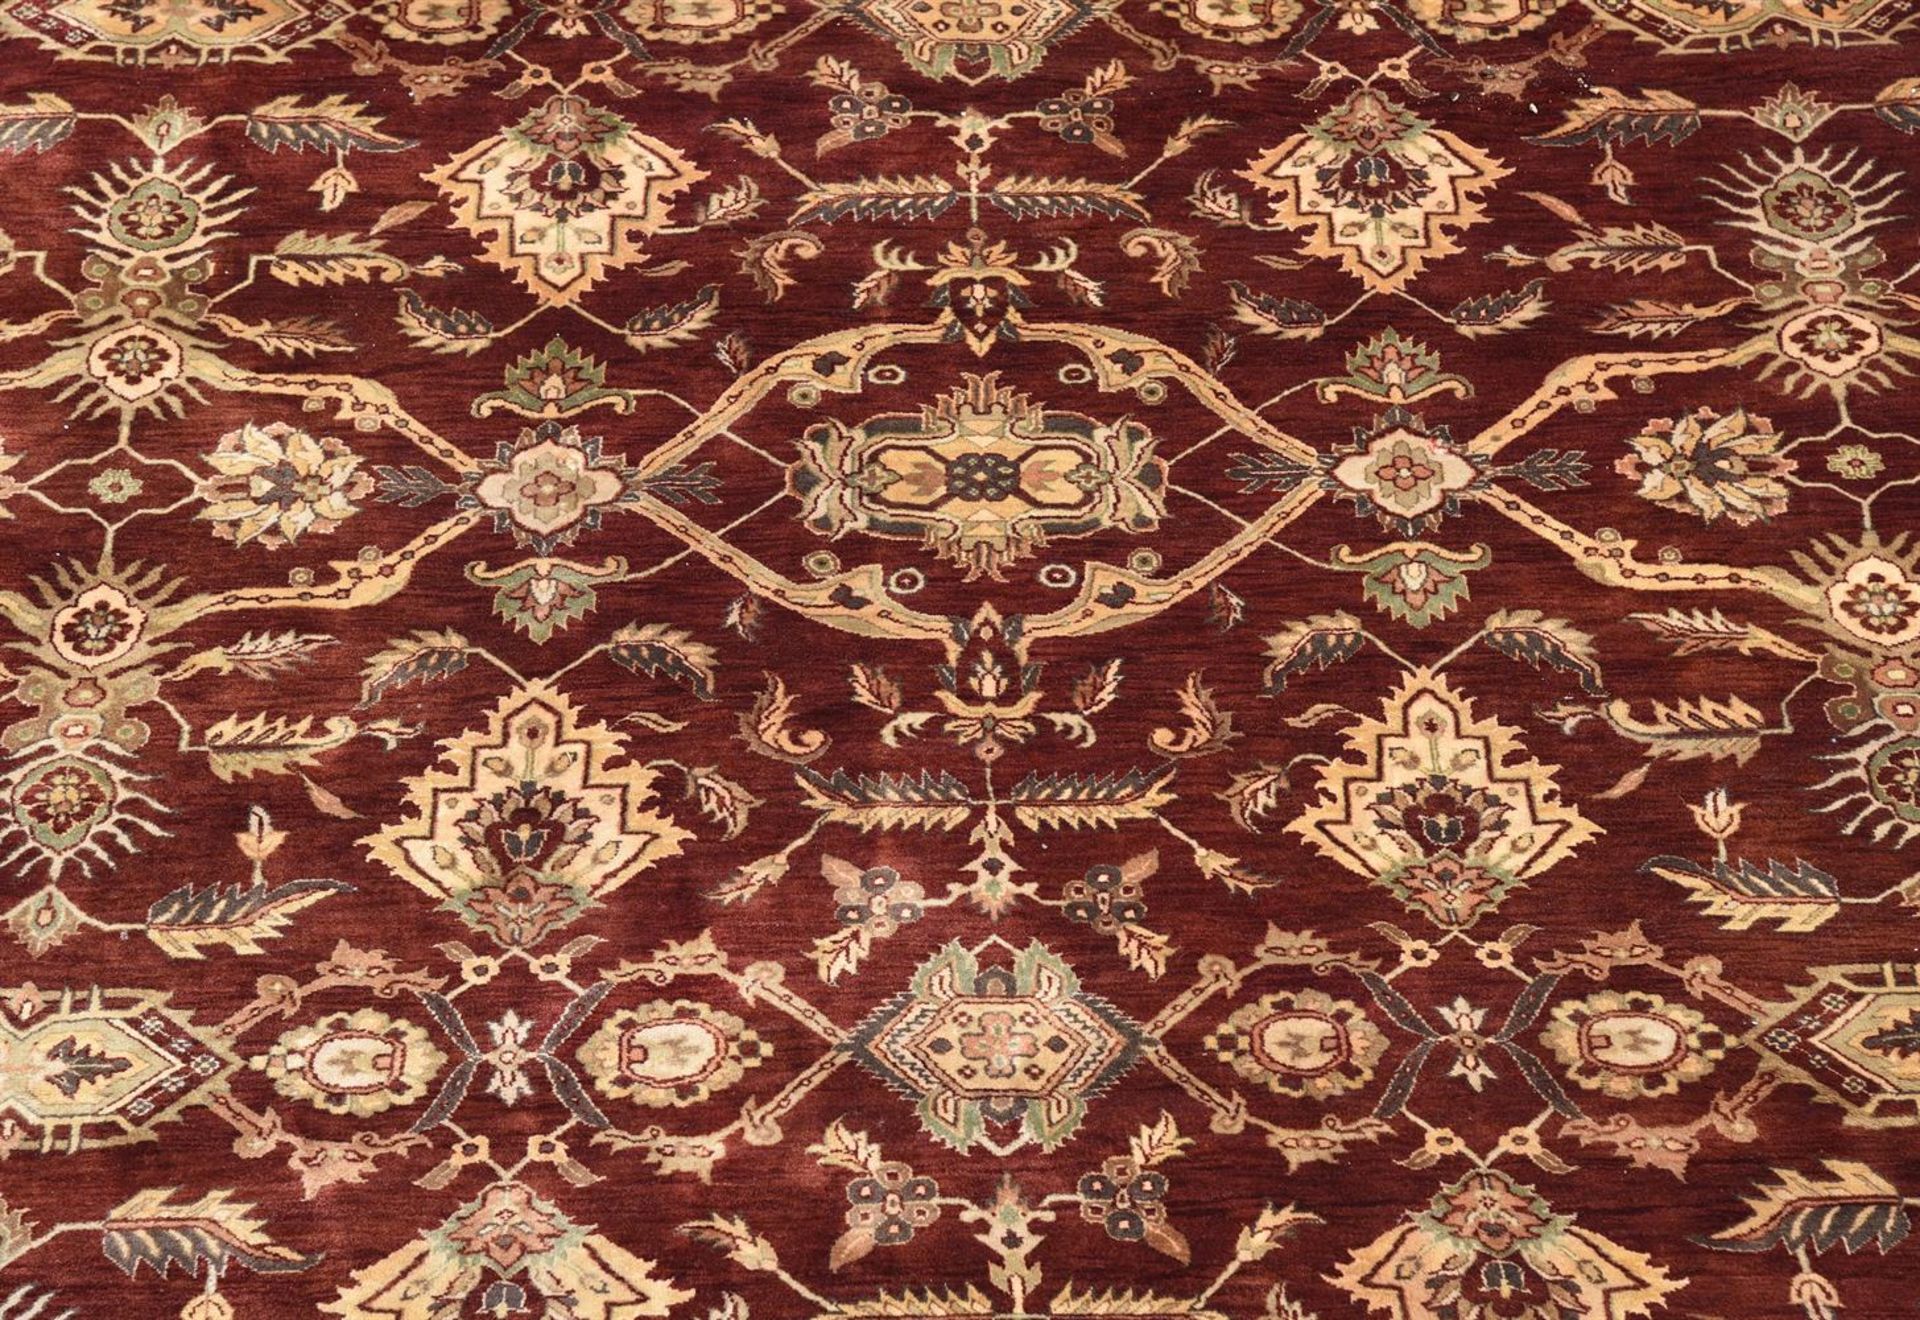 A LARGE AGRA STYLE CARPET - Image 2 of 3